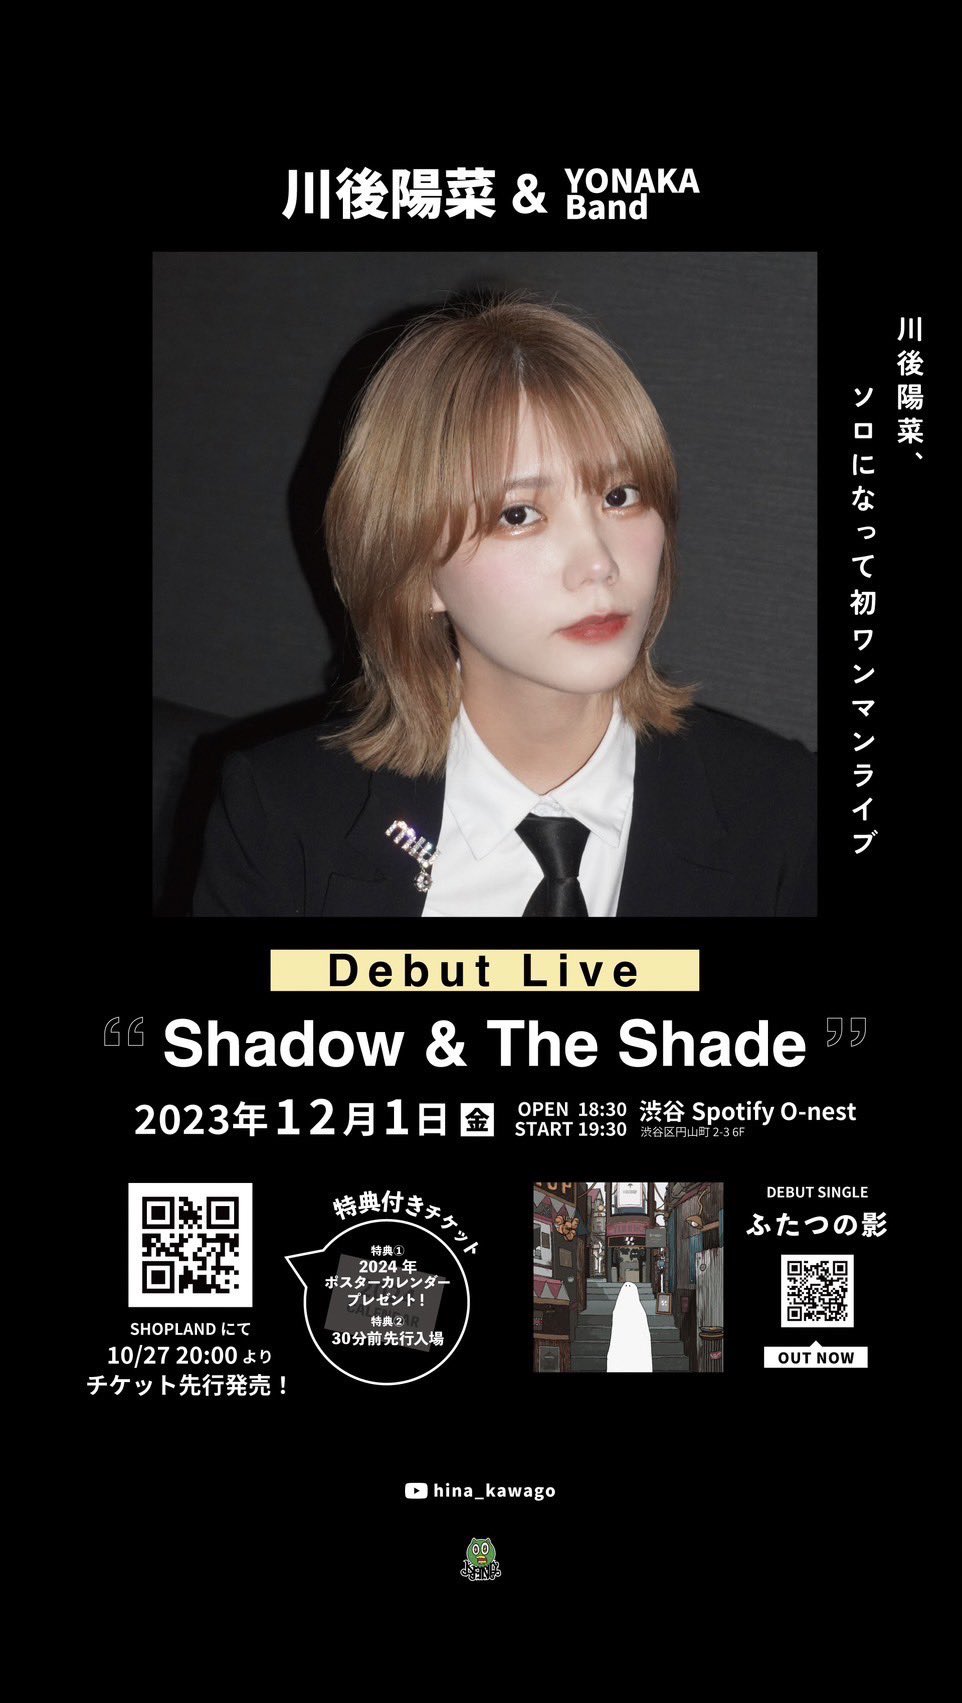 Debut Live ” Shadow & The Shade “